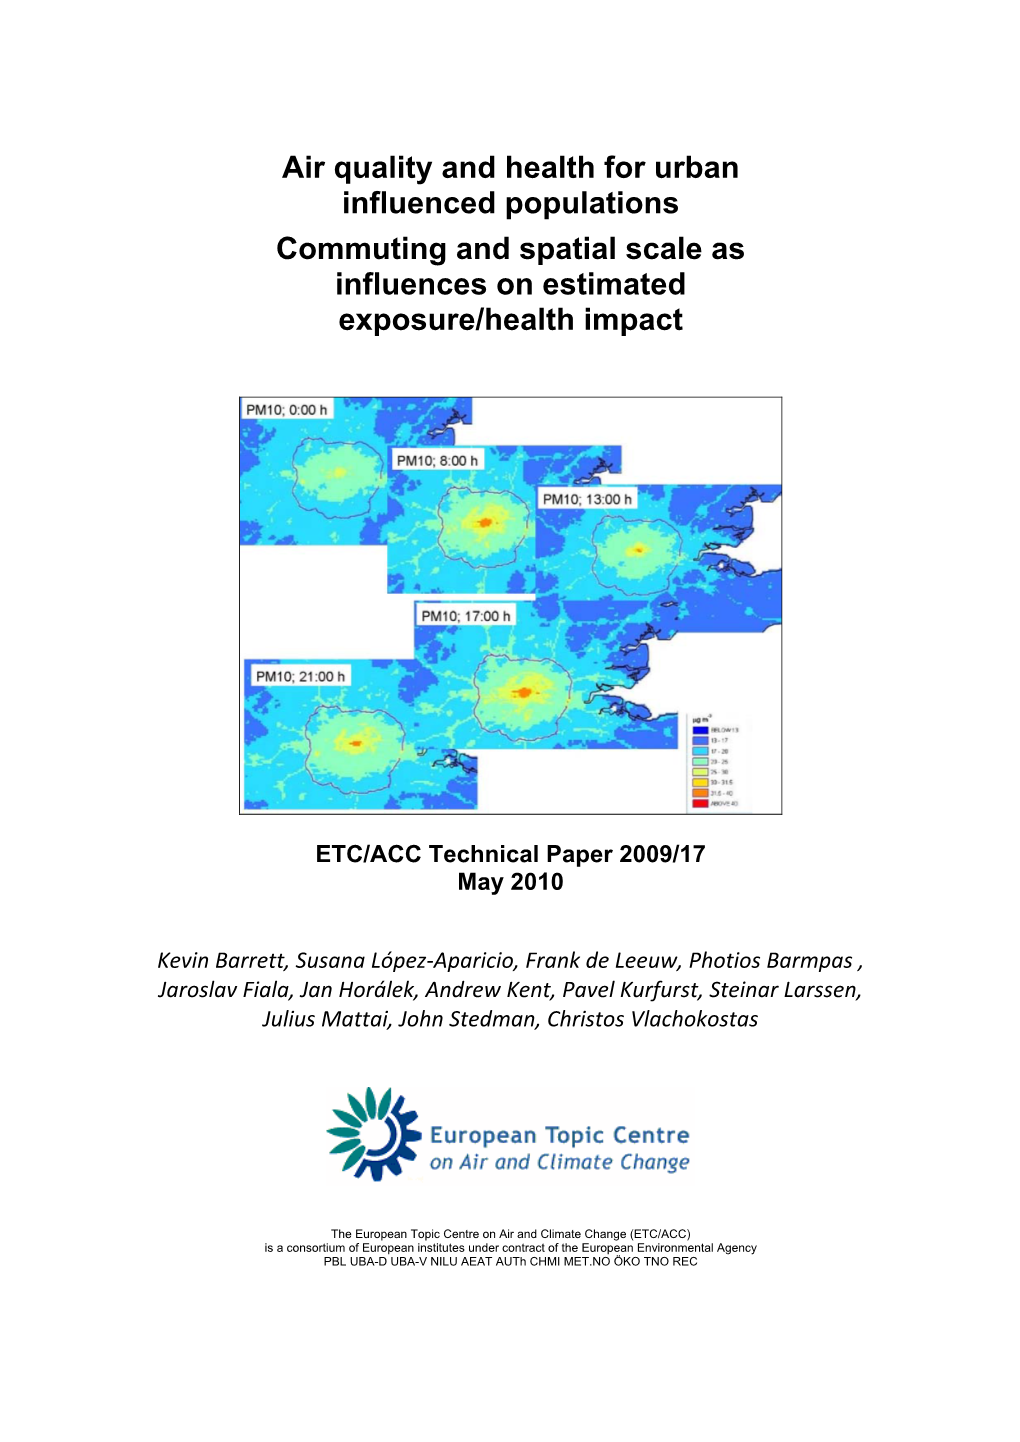 Air Quality and Health for Urban Influenced Populations Commuting and Spatial Scale As Influences on Estimated Exposure/Health Impact